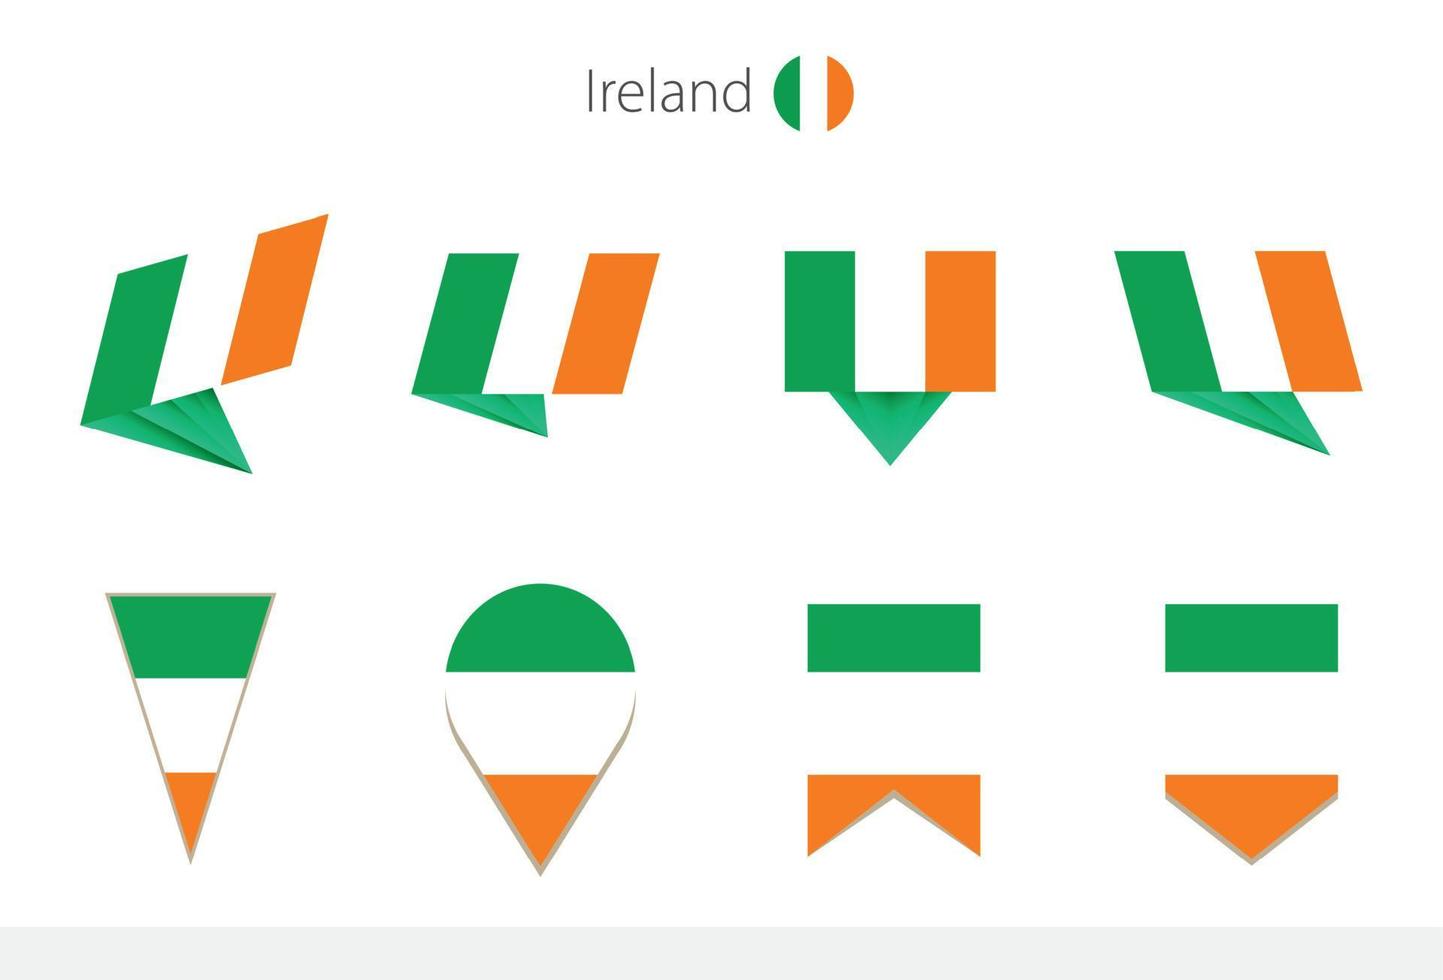 Ireland national flag collection, eight versions of Ireland vector flags.